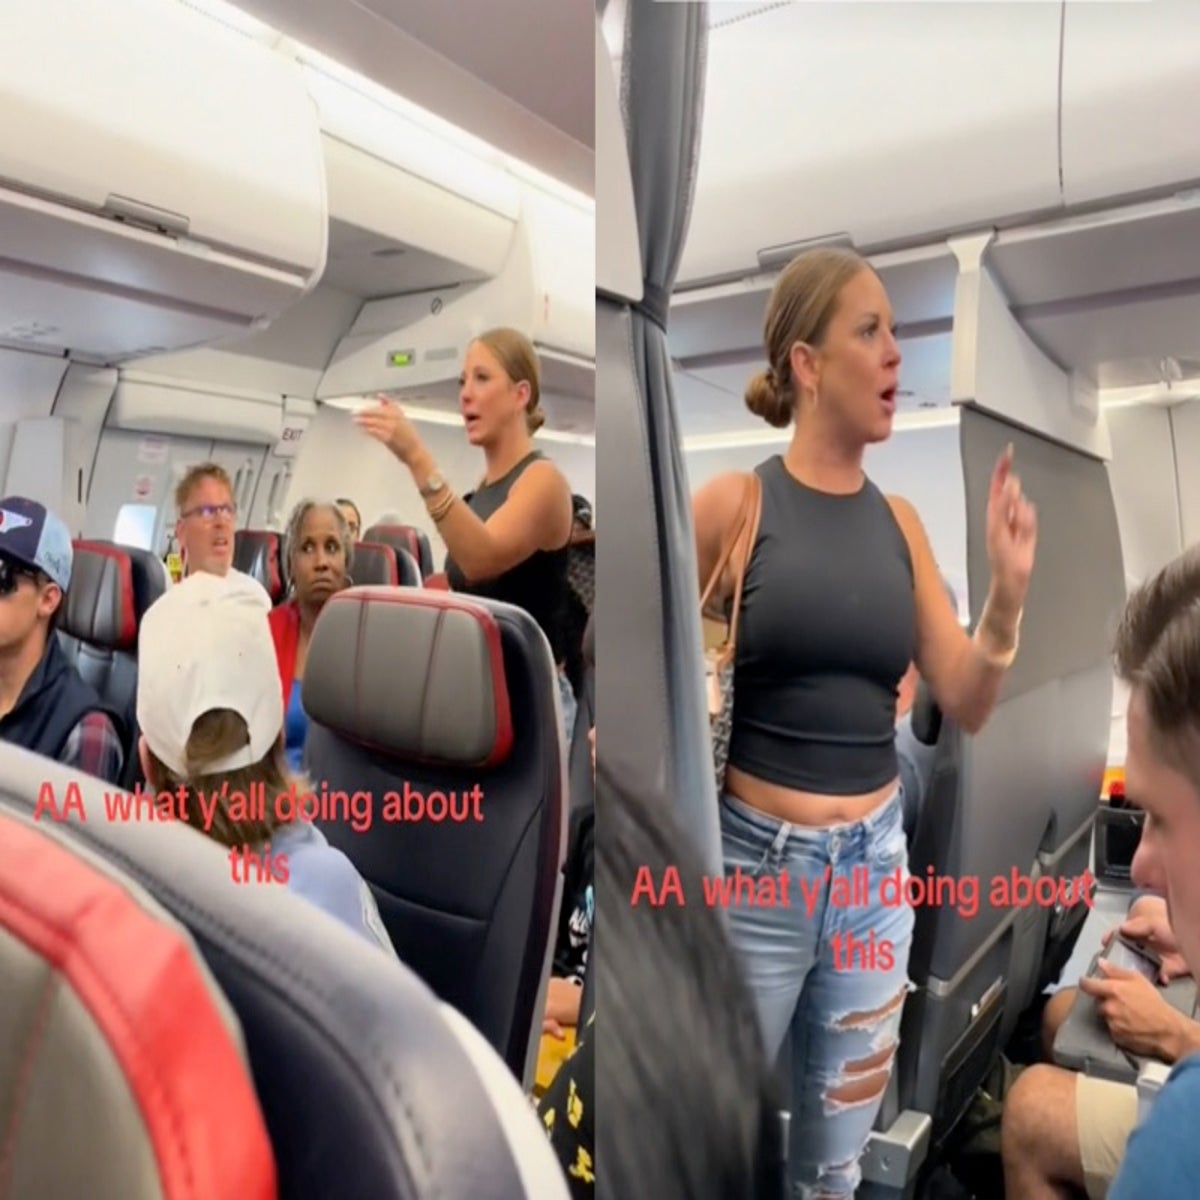 Woman exits plane after tirade about passenger who is 'not real': 'I'm not about to be Final Destination-ed' | The Independent